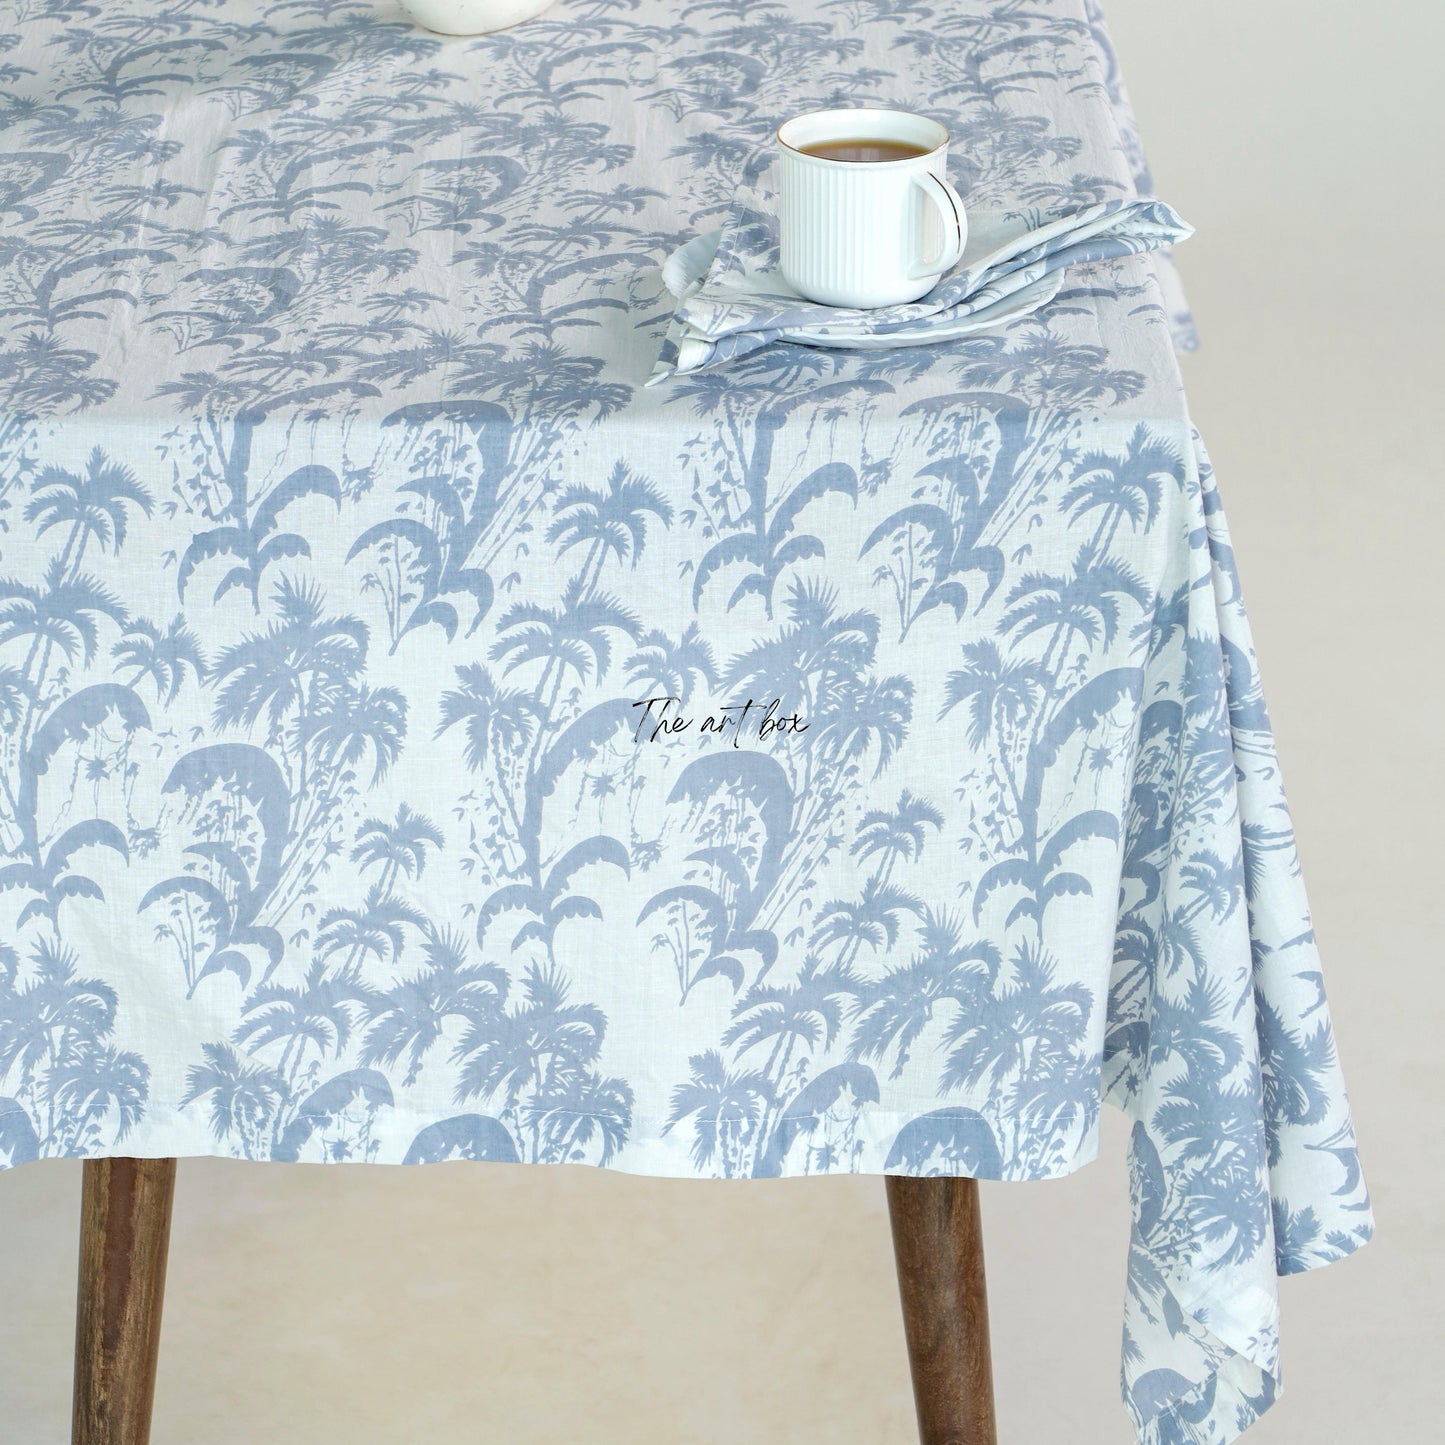 Vintage Garden White Floral Cotton Printed Table Cover for Classic Style